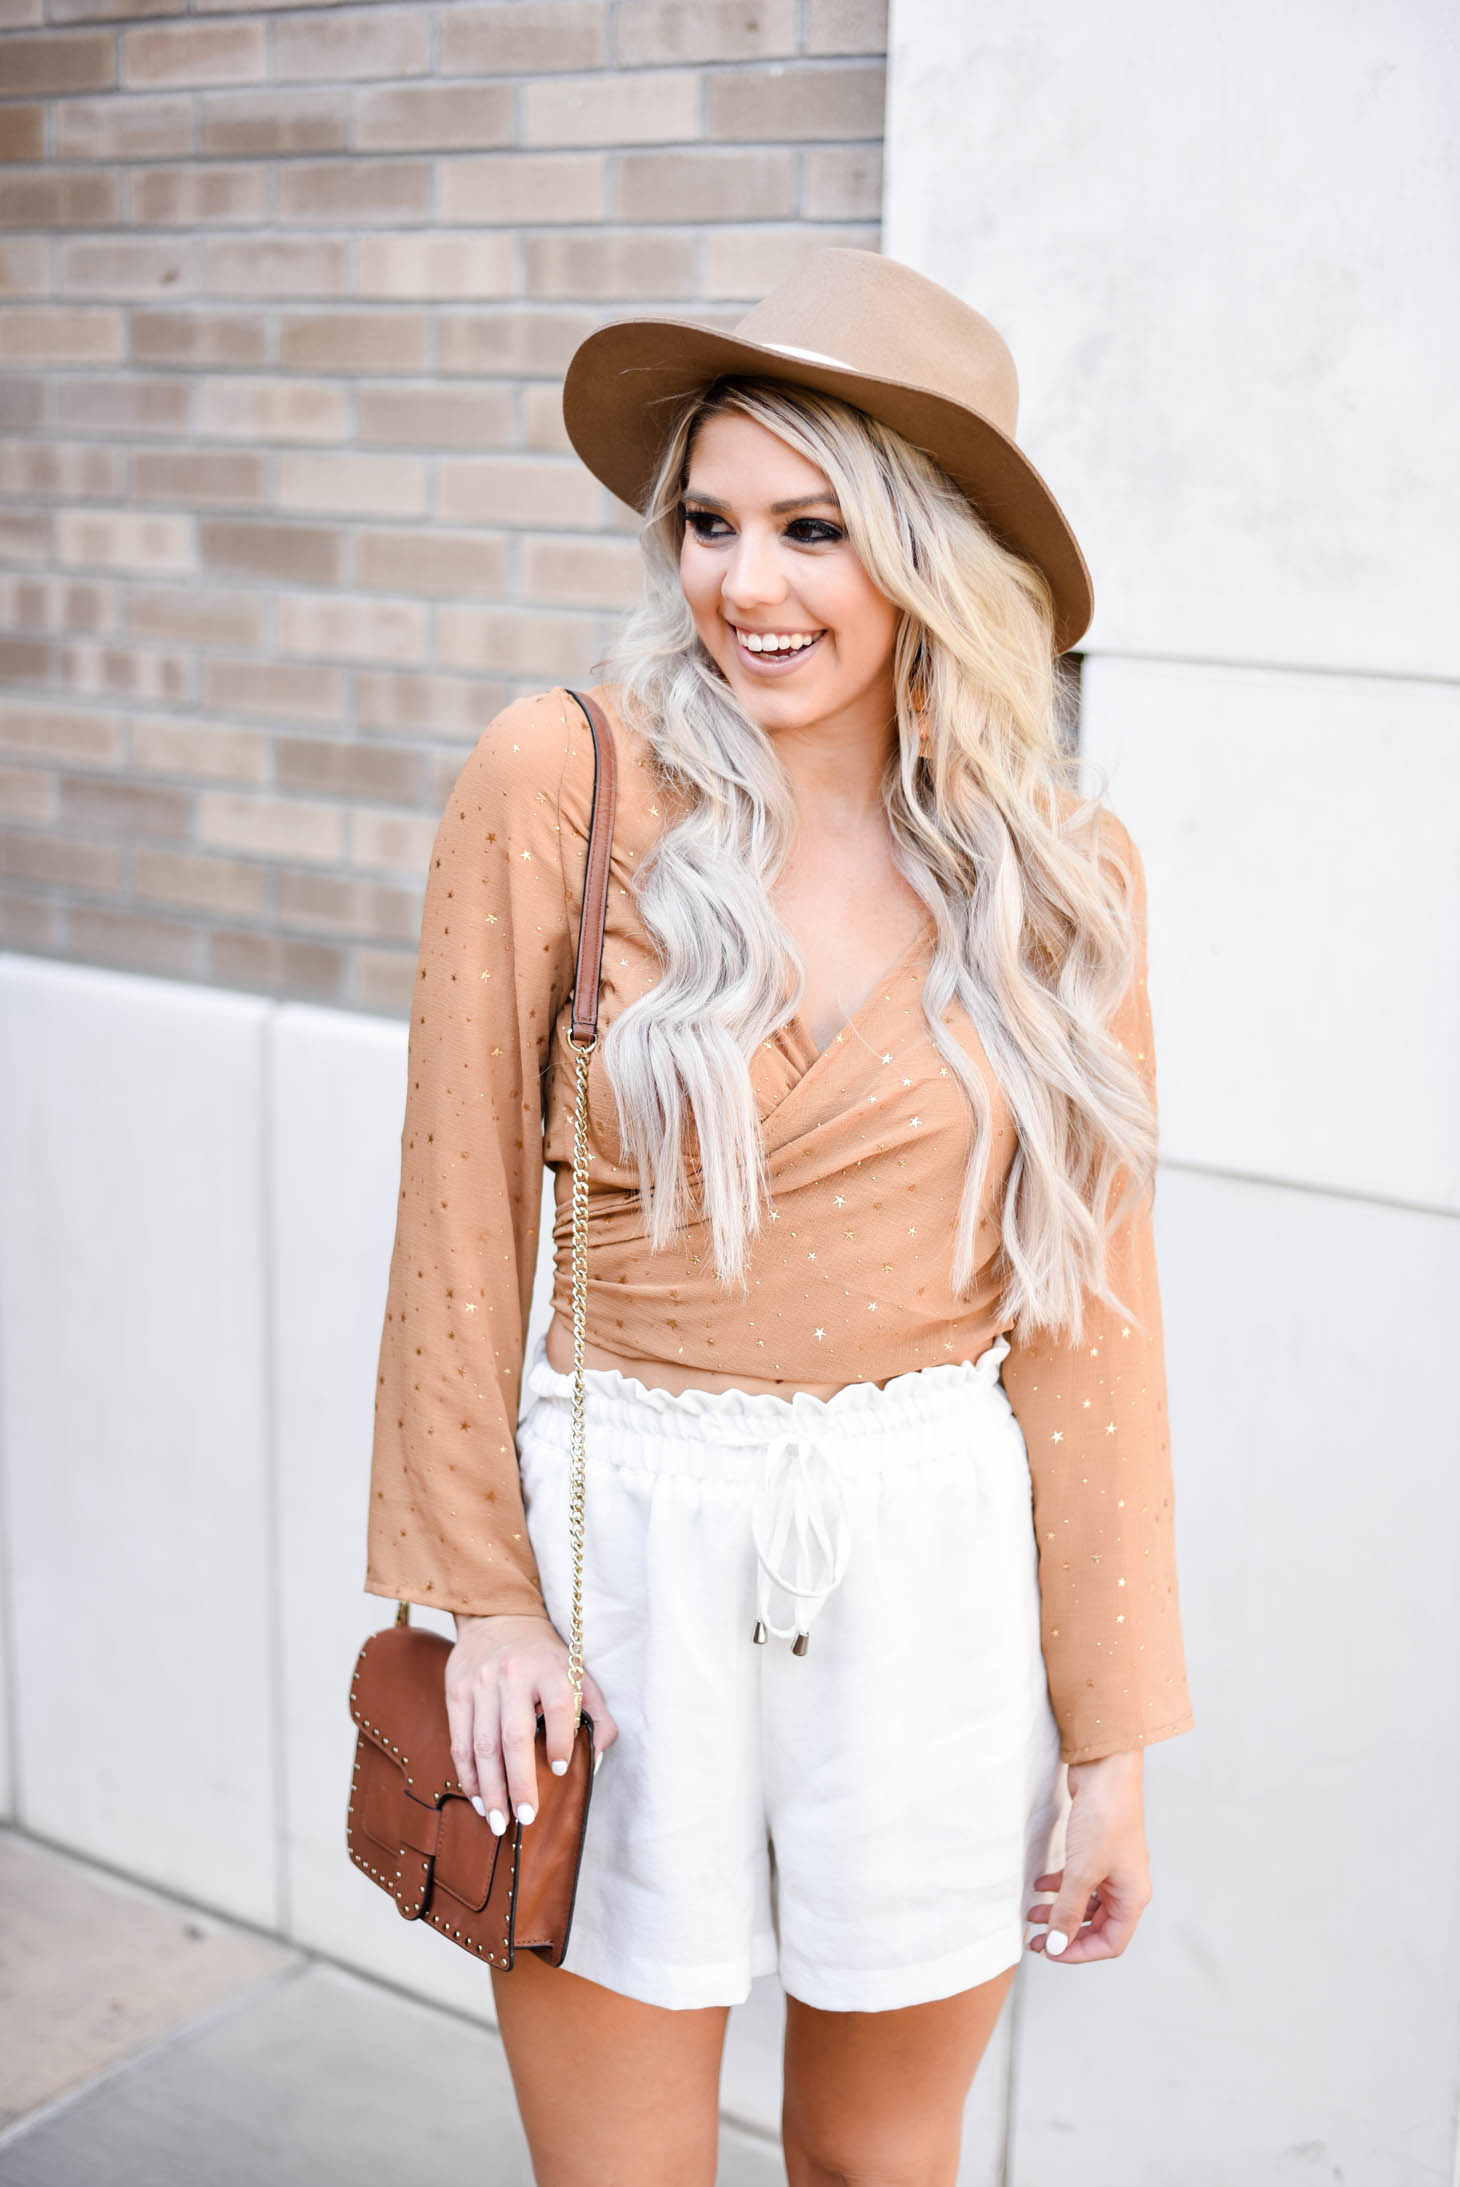 Erin Elizabeth of Wink and a Twirl shares the cutest transitional Fall style from Goodnight Macaroon